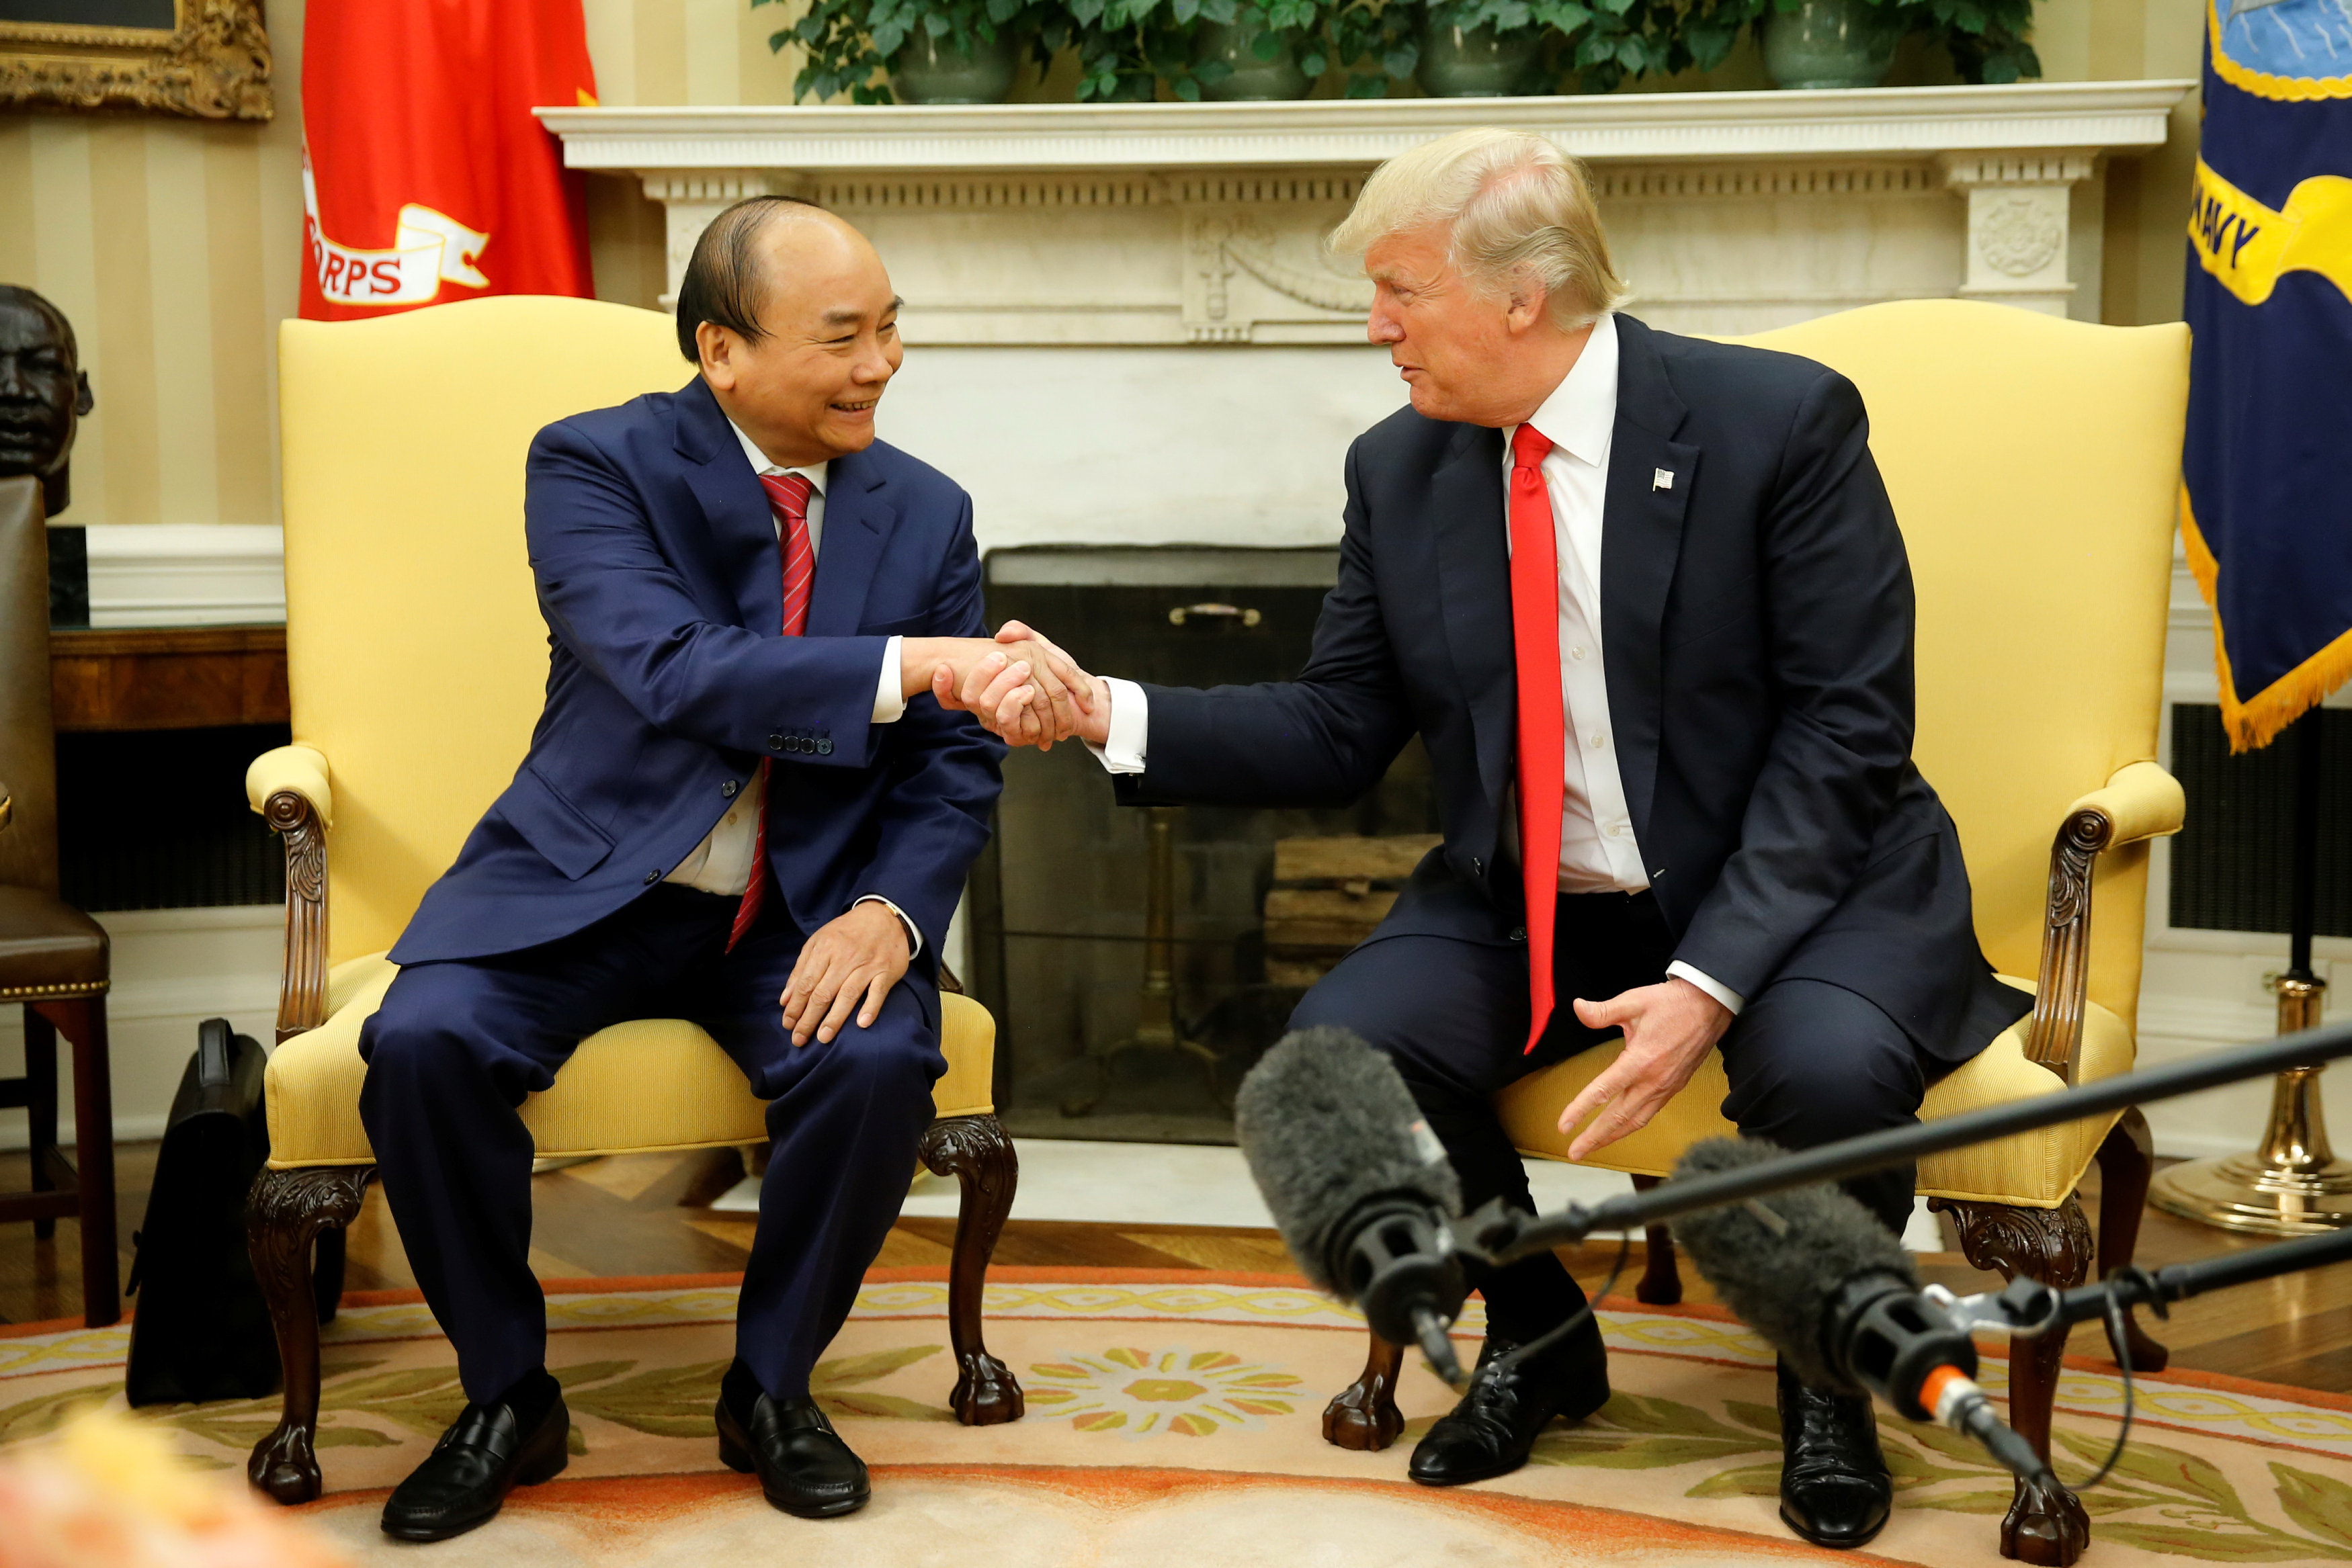 Joint statement by Vietnam, US after PM Phuc’s visit to White House